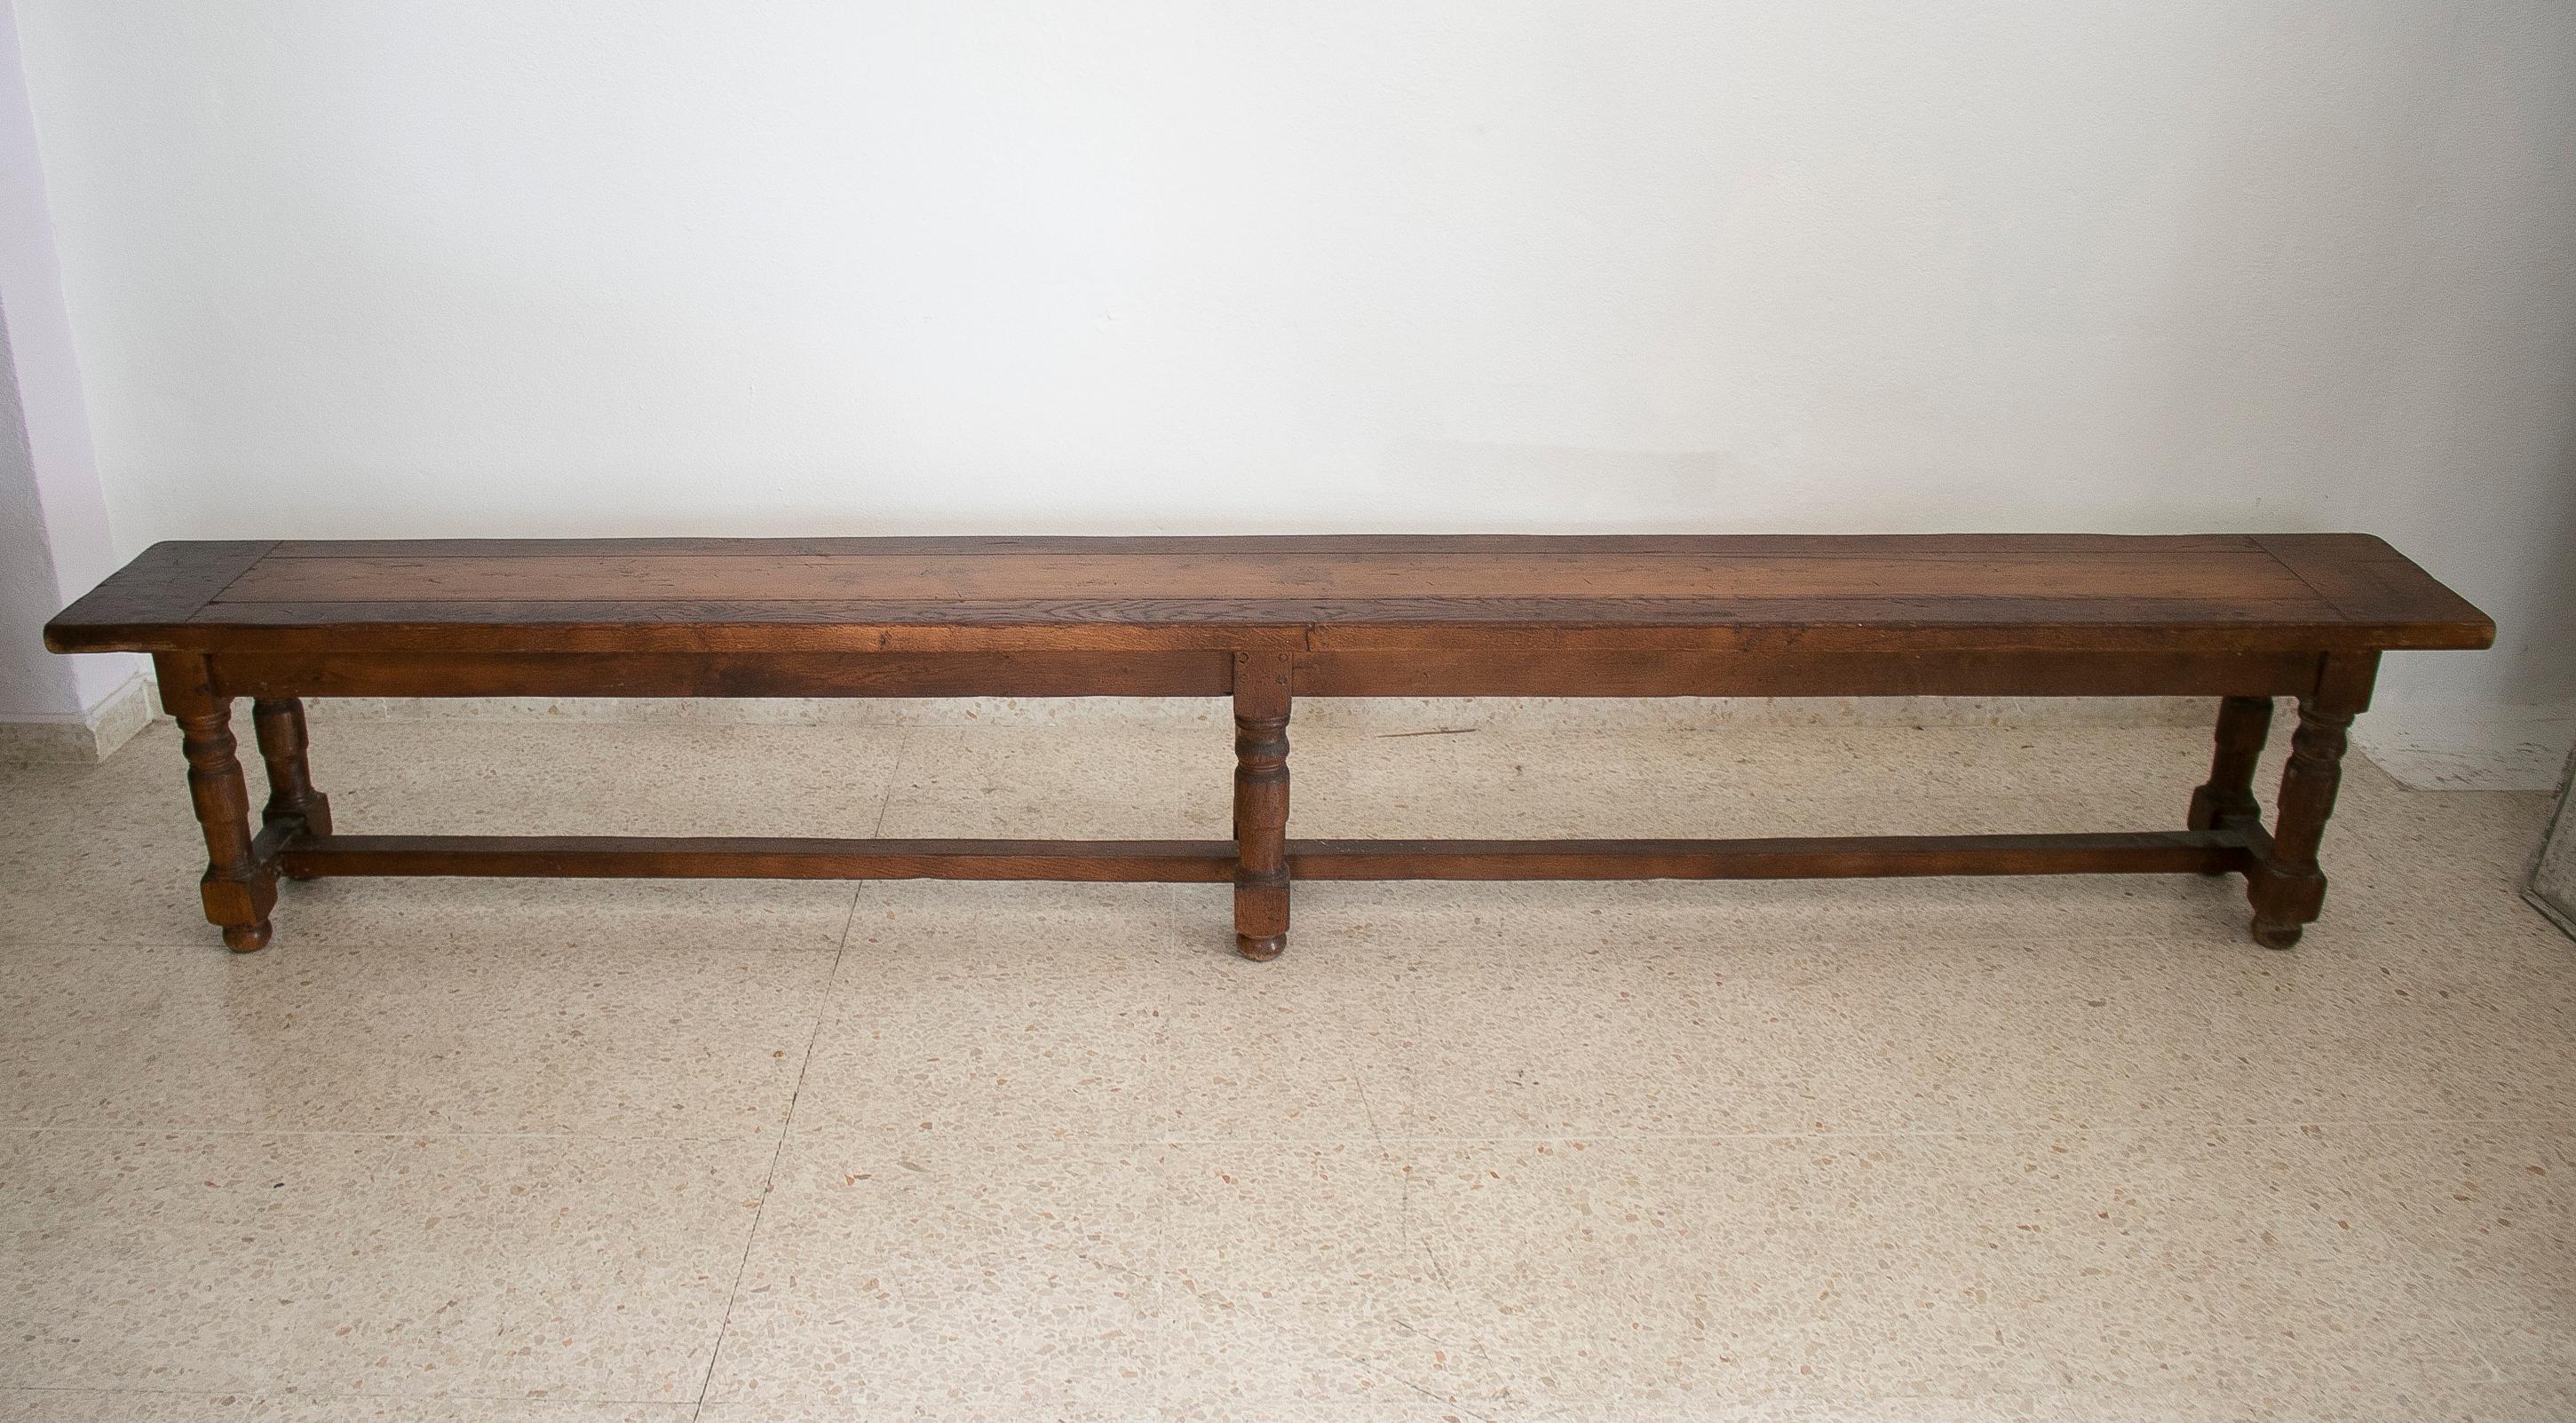 Rustic 1970s Spanish oak long bench with beam.